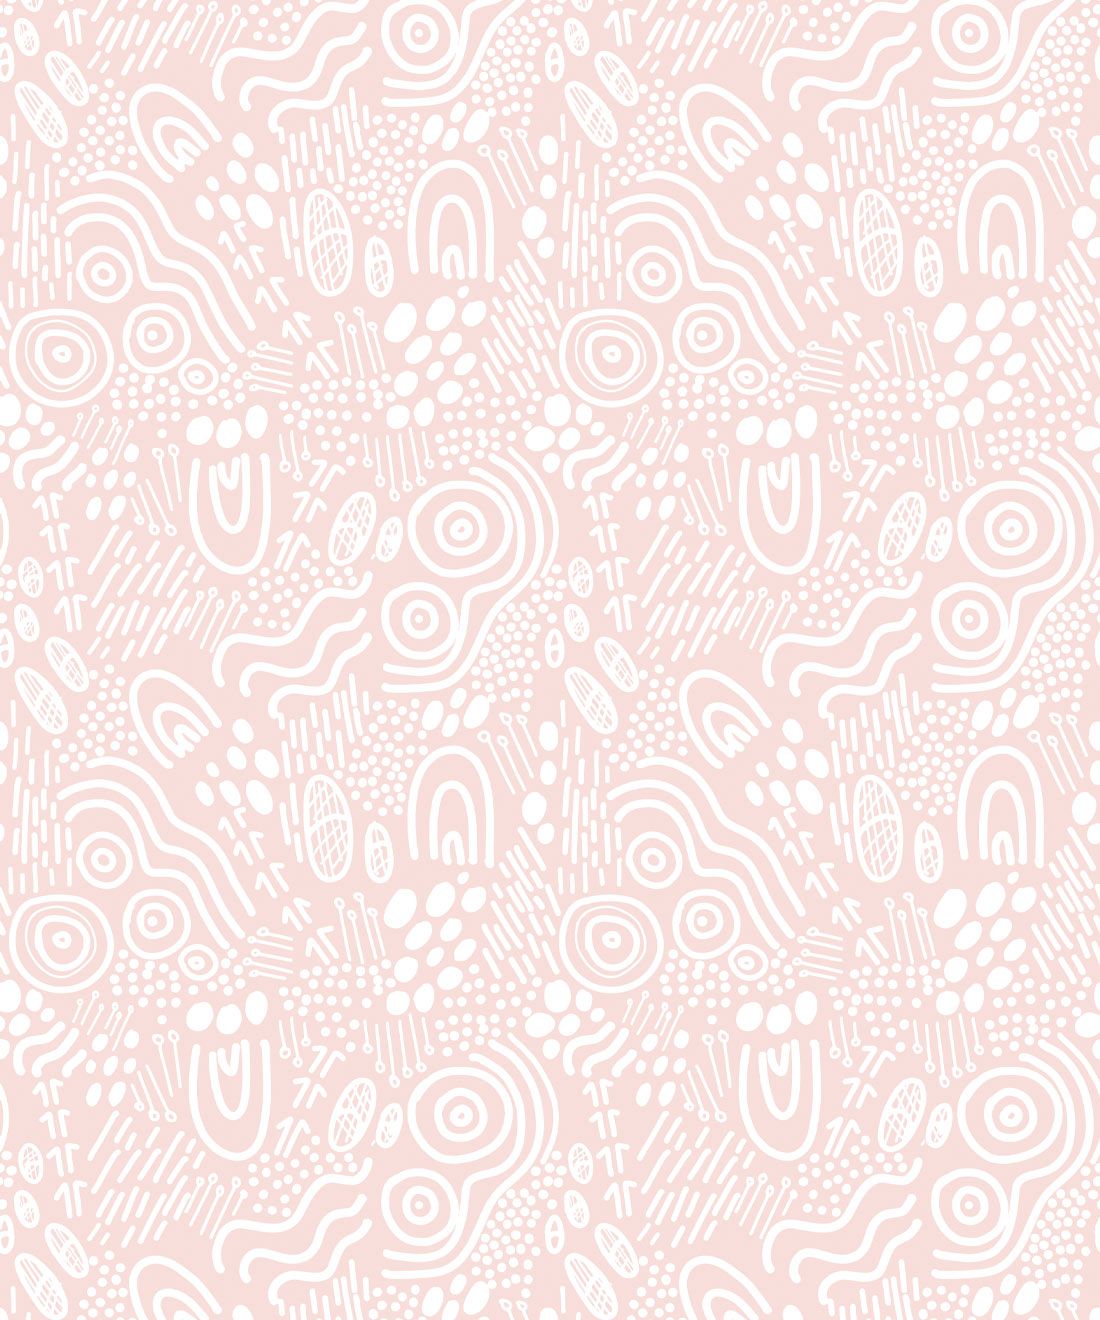 Landscapes Wallpaper • geometric • Pink & White• Swatch